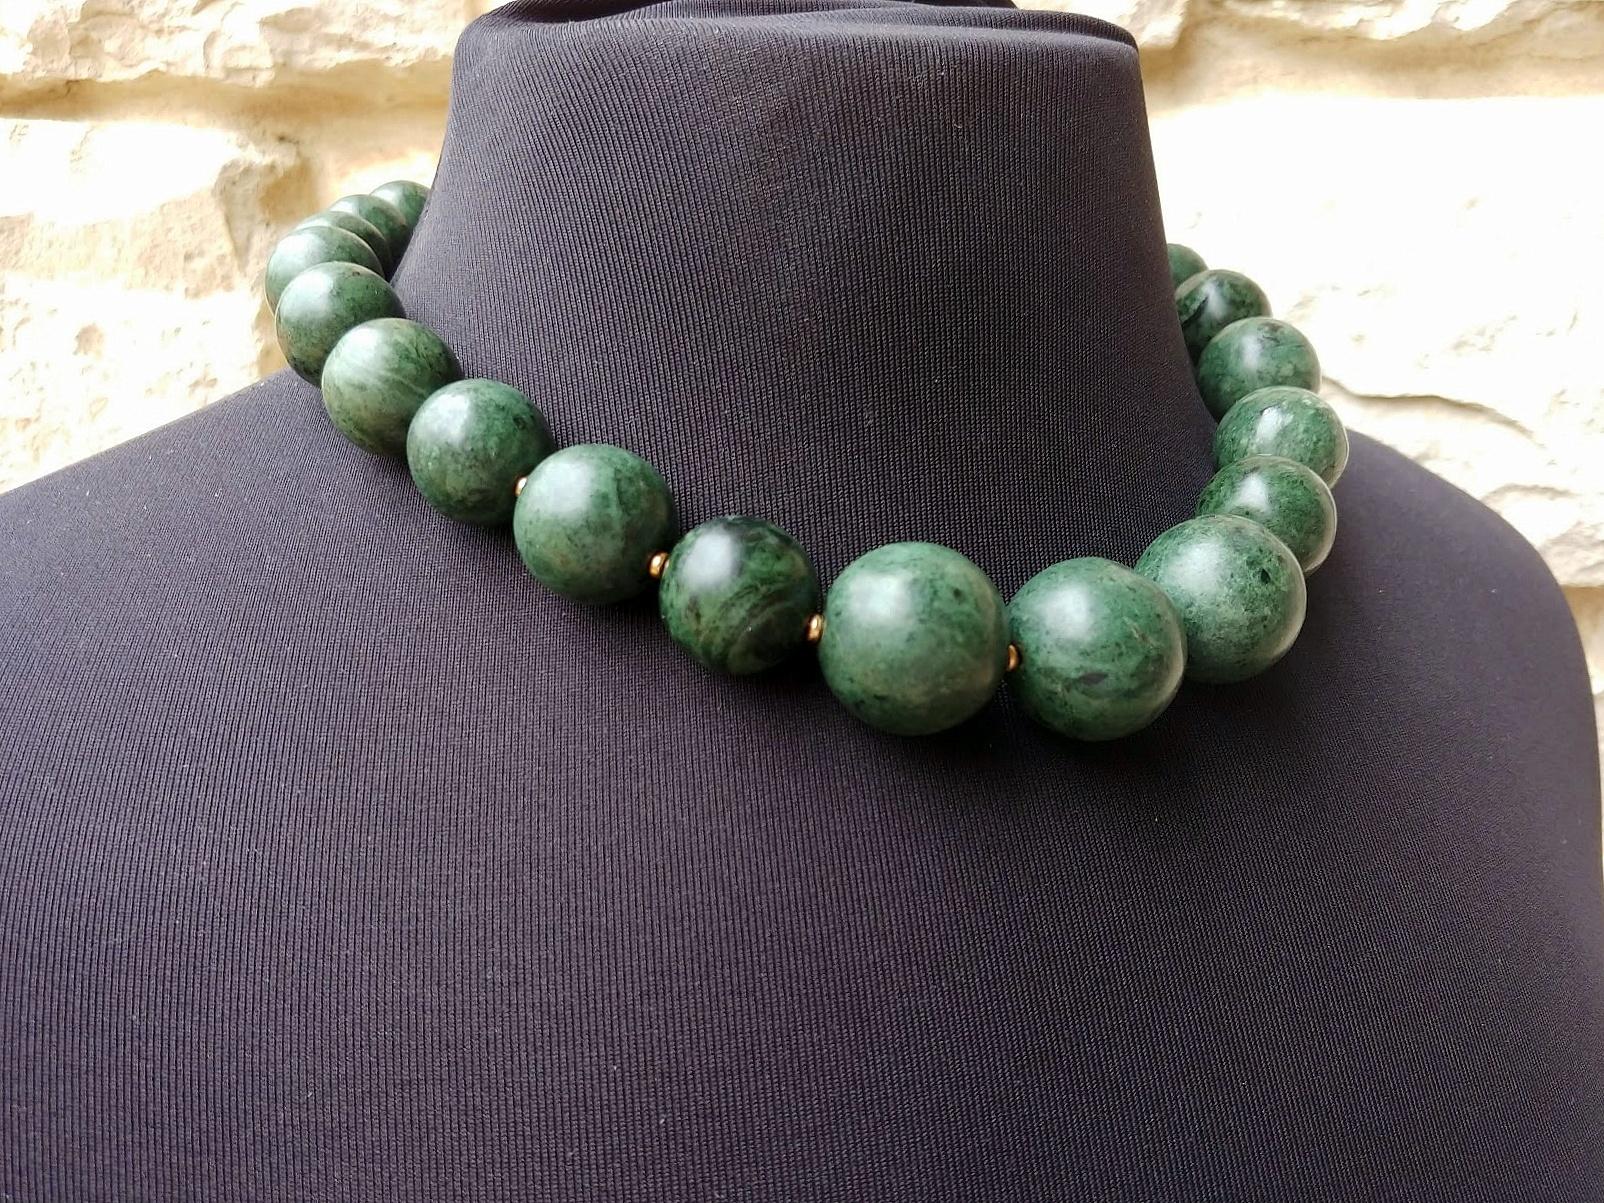 This Green Nephrite is from the Eastern Pamir. Unique and very rare nephrite! 

The necklace is 19 inches (48 cm) long, and the beads' sizes vary from 15 mm to 23 mm. 
Nephrite beads are nontranslucent.
The color of the beads is deep dark green.
The